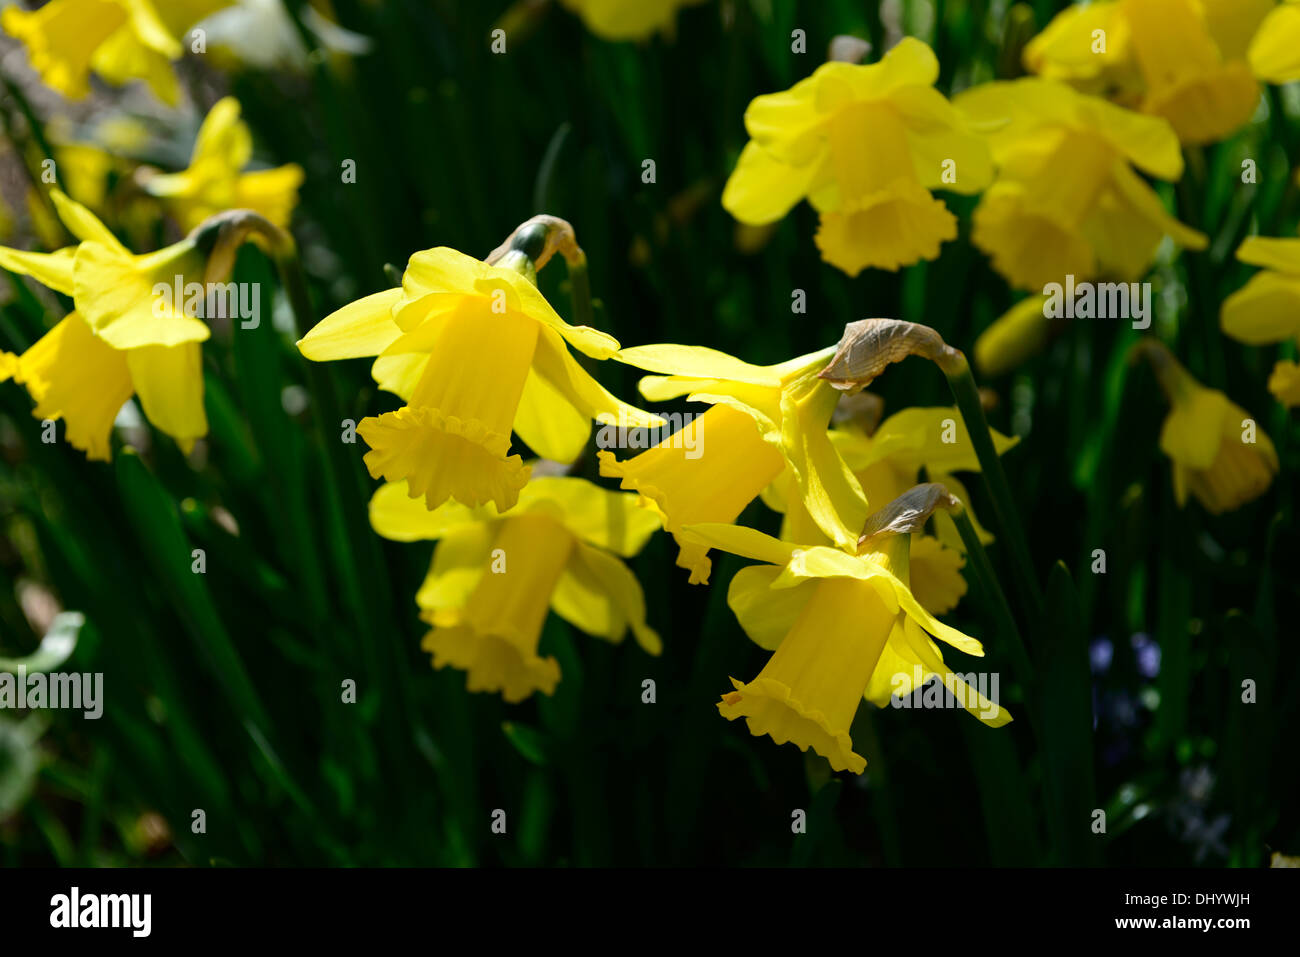 narcissus arkle  yellow flowers flowering blooms daffodils bulbs spring sunny sunlight backlit backlighting closeups close-ups Stock Photo